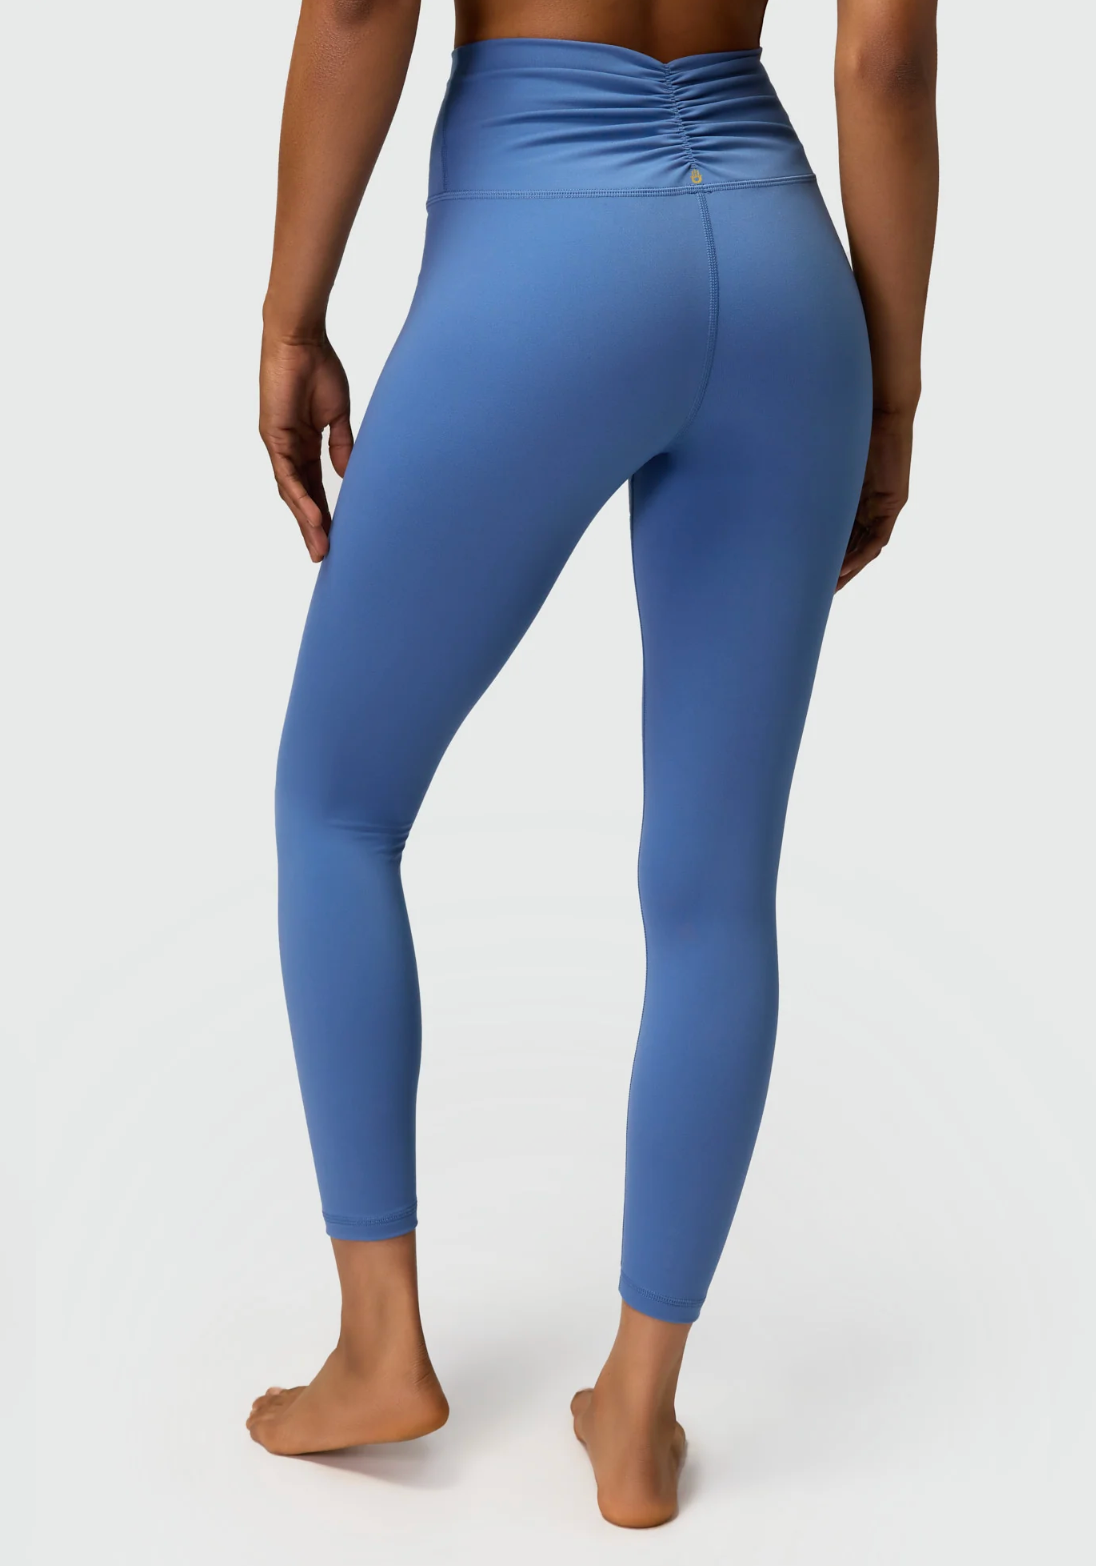 Spiritual Gangster Everly Cinched Waist Legging - Pacific Blue